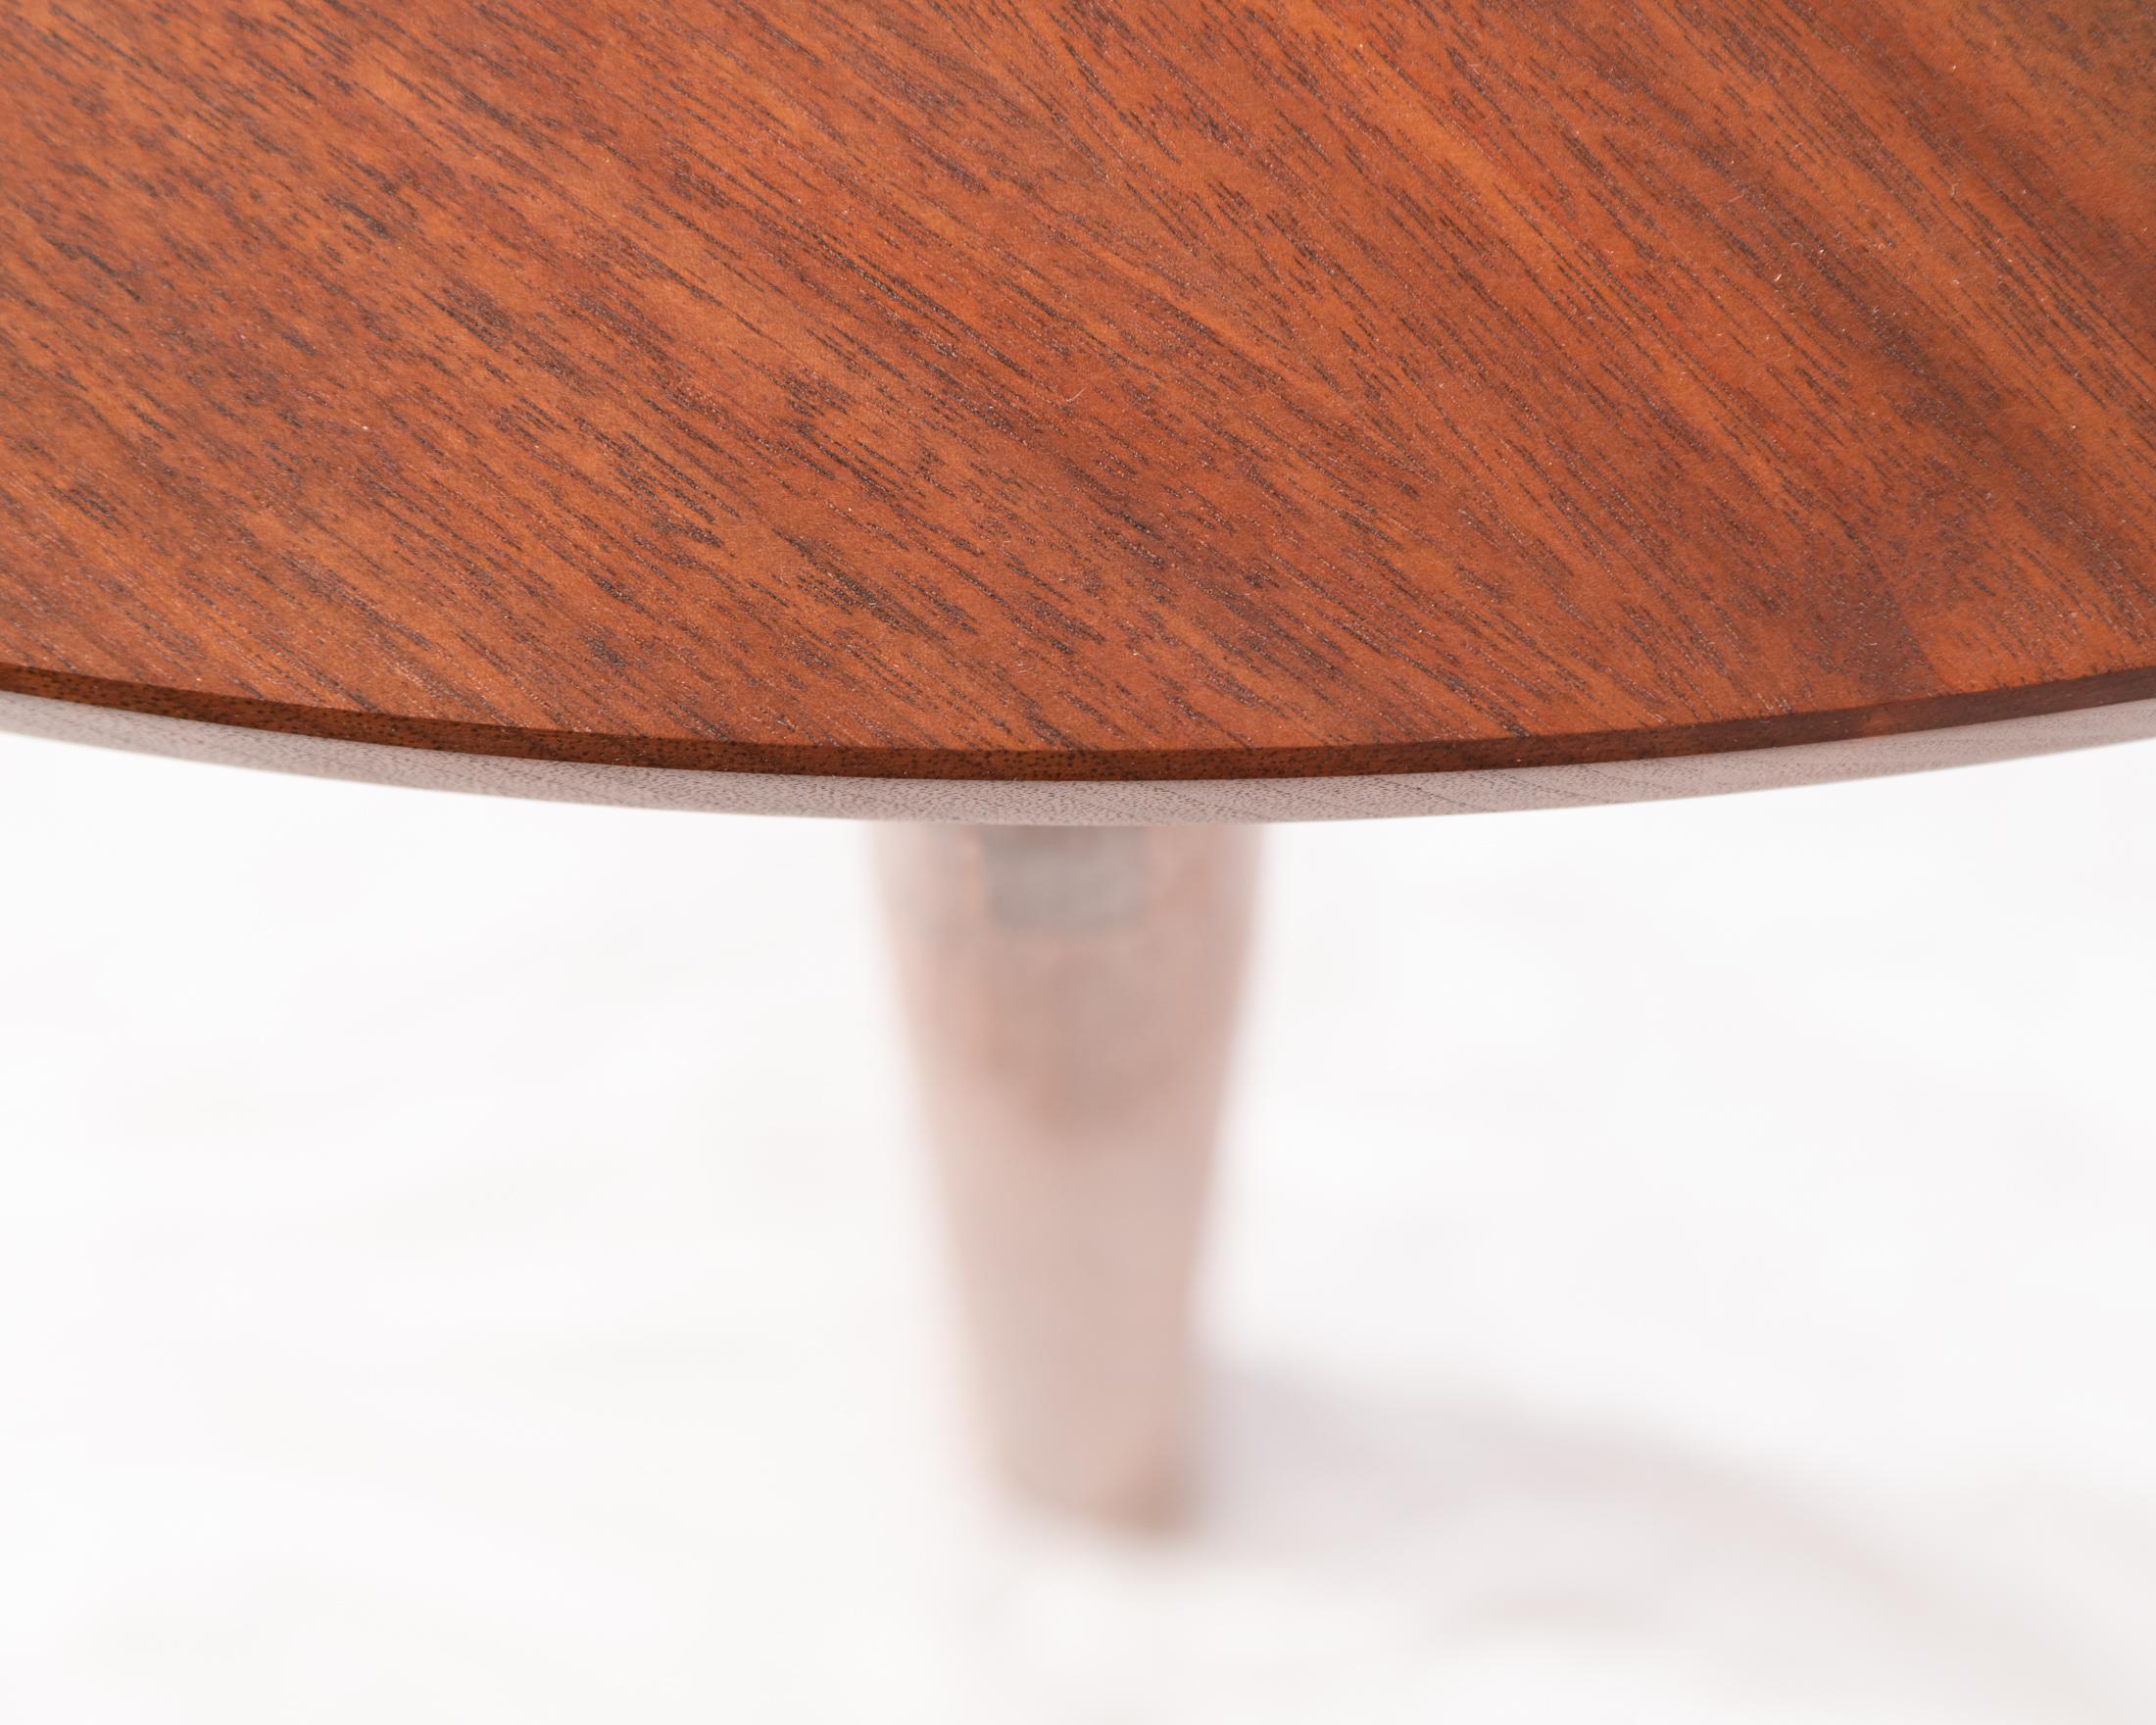 Enso Table, Walnut Dining Table with Knife-Edge and Exposed Joinery In New Condition For Sale In Chattanooga, TN